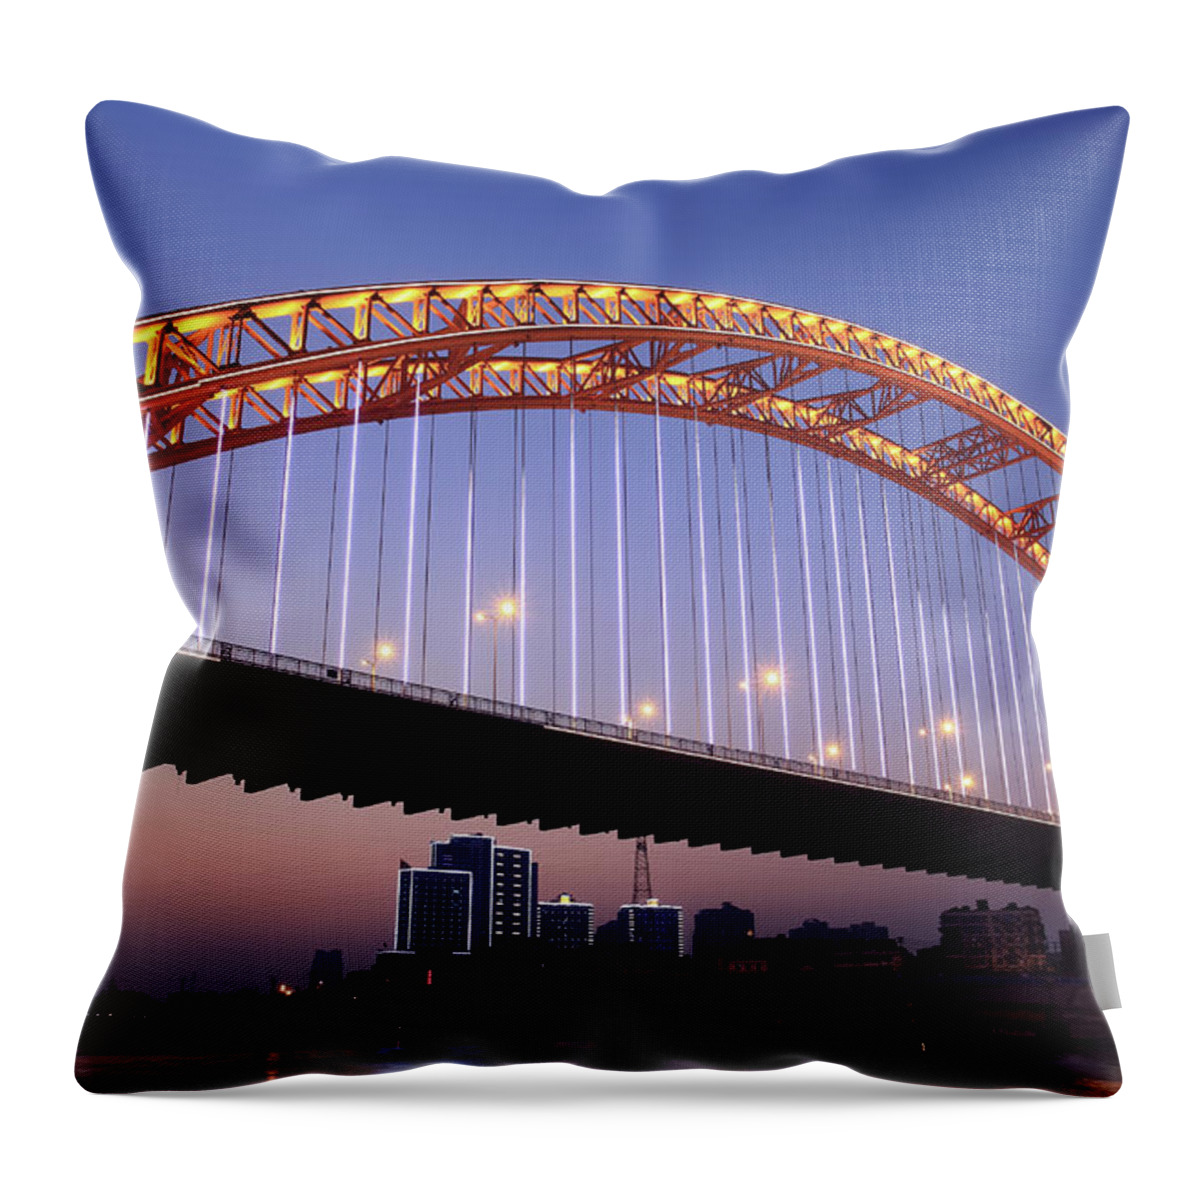 Arch Throw Pillow featuring the photograph Arch Bridge by Real444